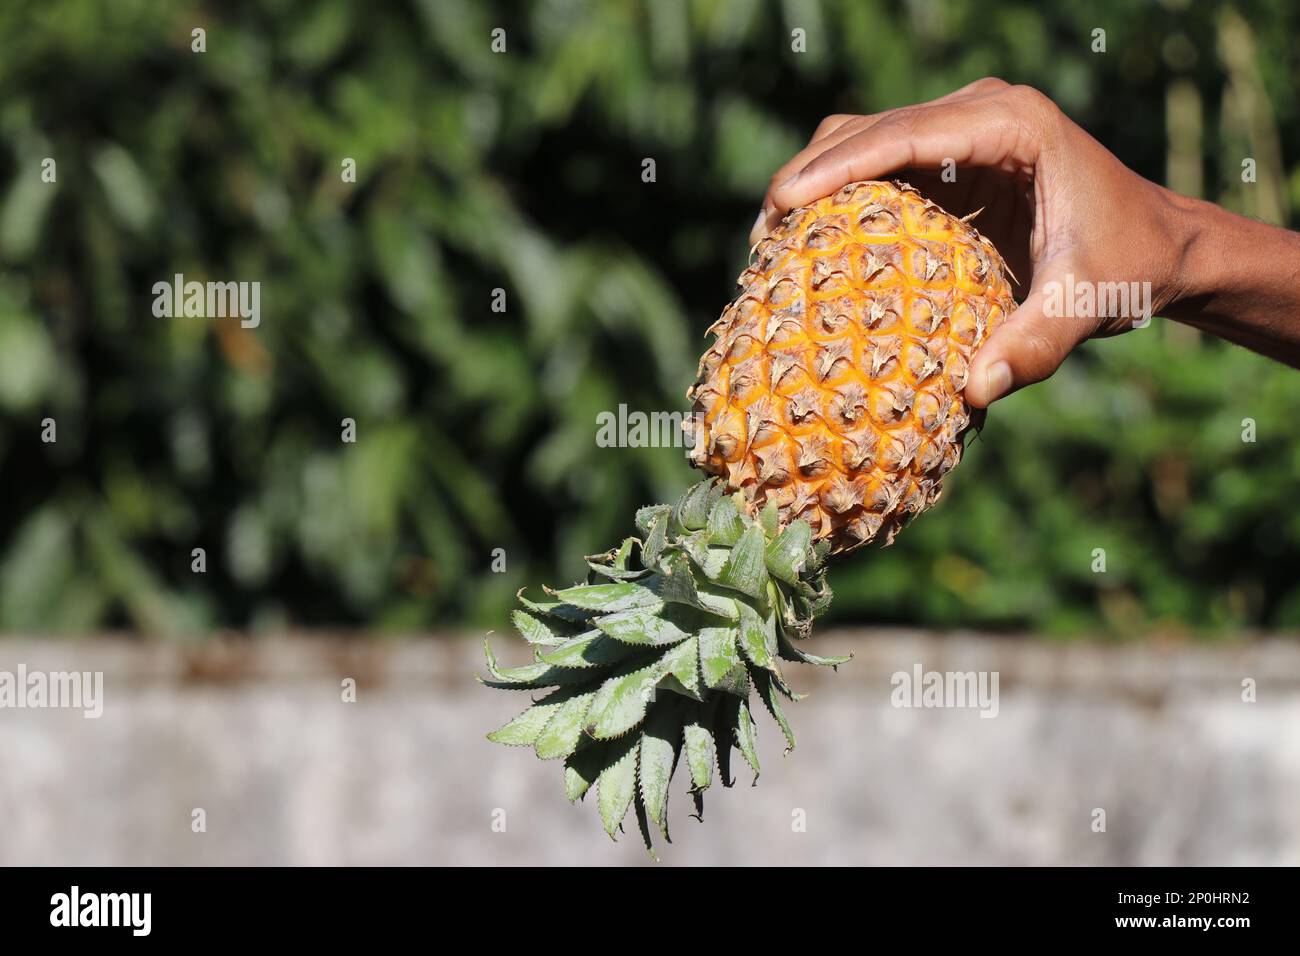 Pineapple fruit held in hand upside down on a natural background. Pineapple is a fruit that has a sweet taste Stock Photo